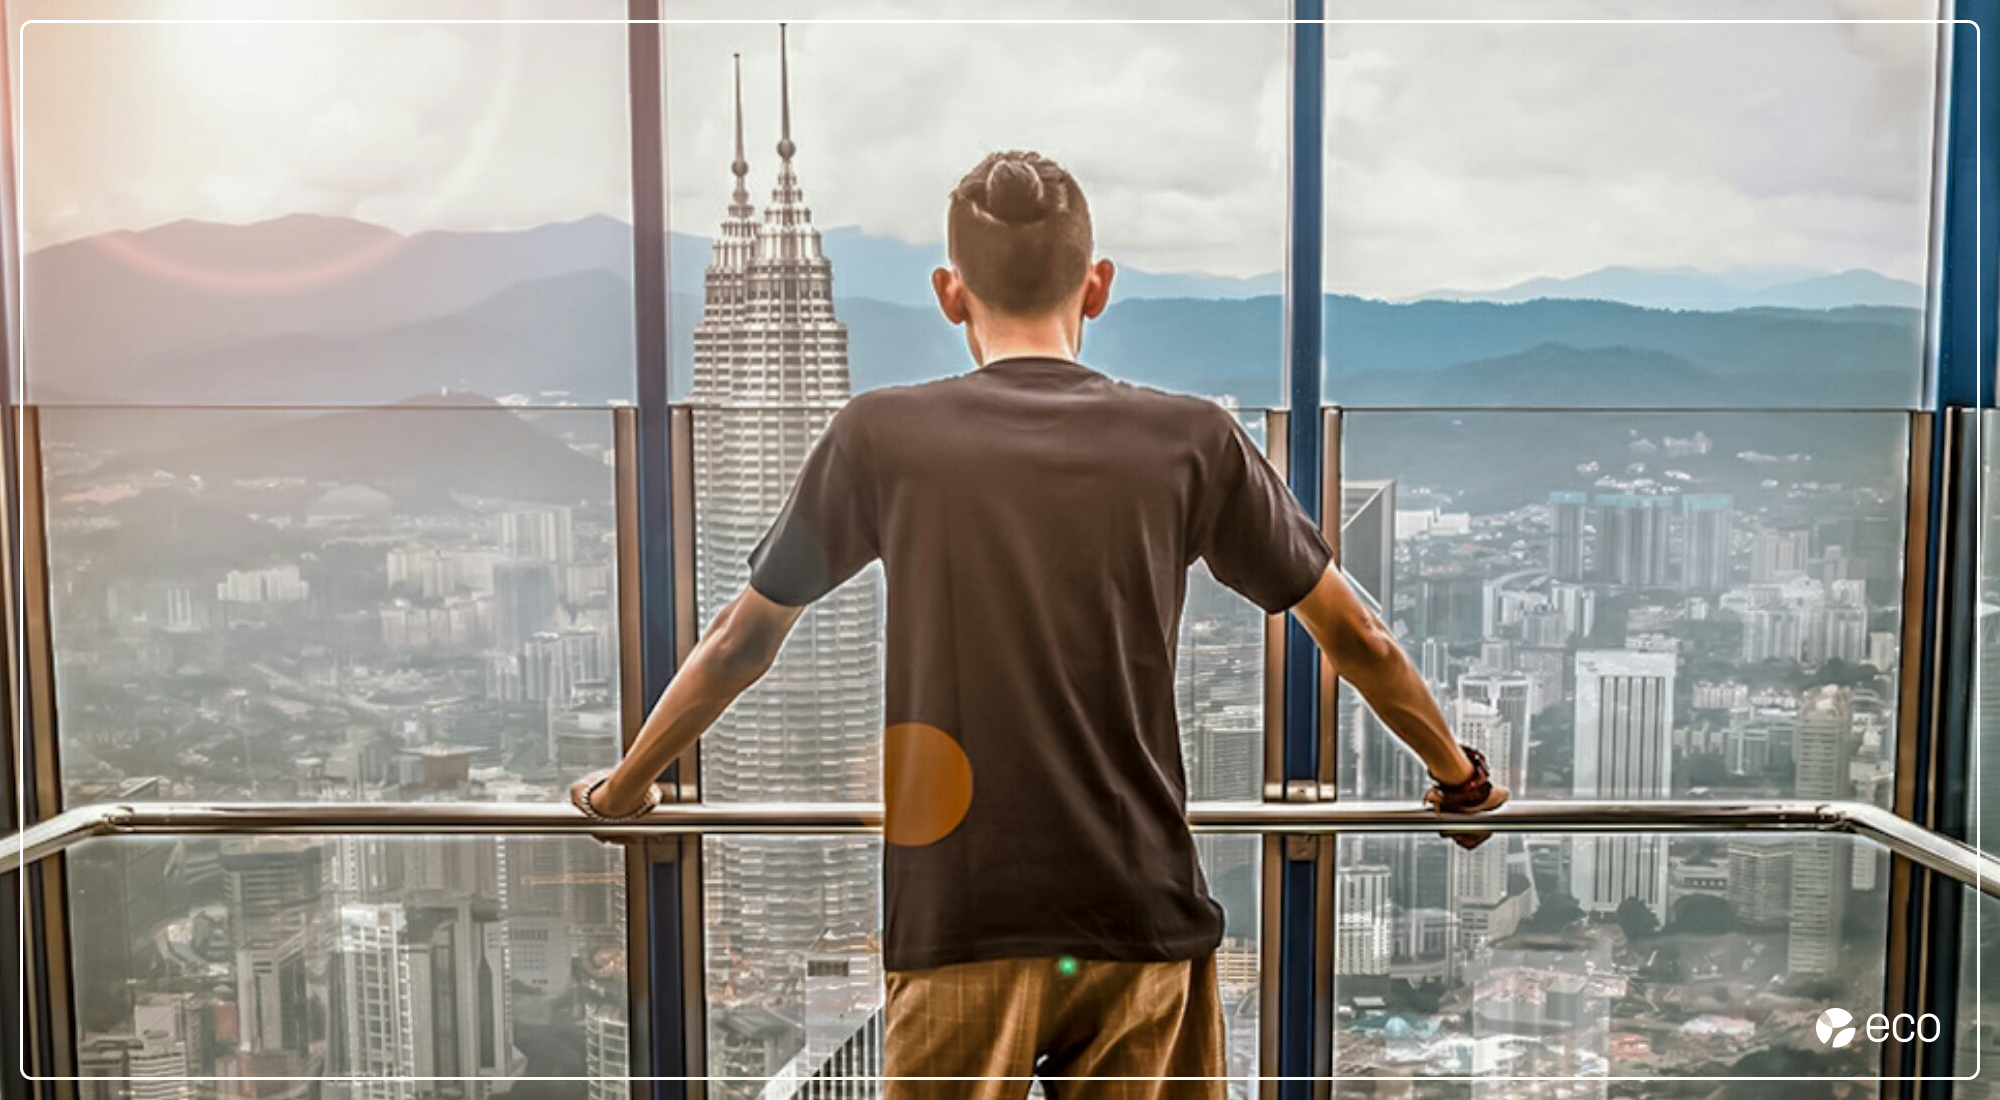 Man overlooking city from office building